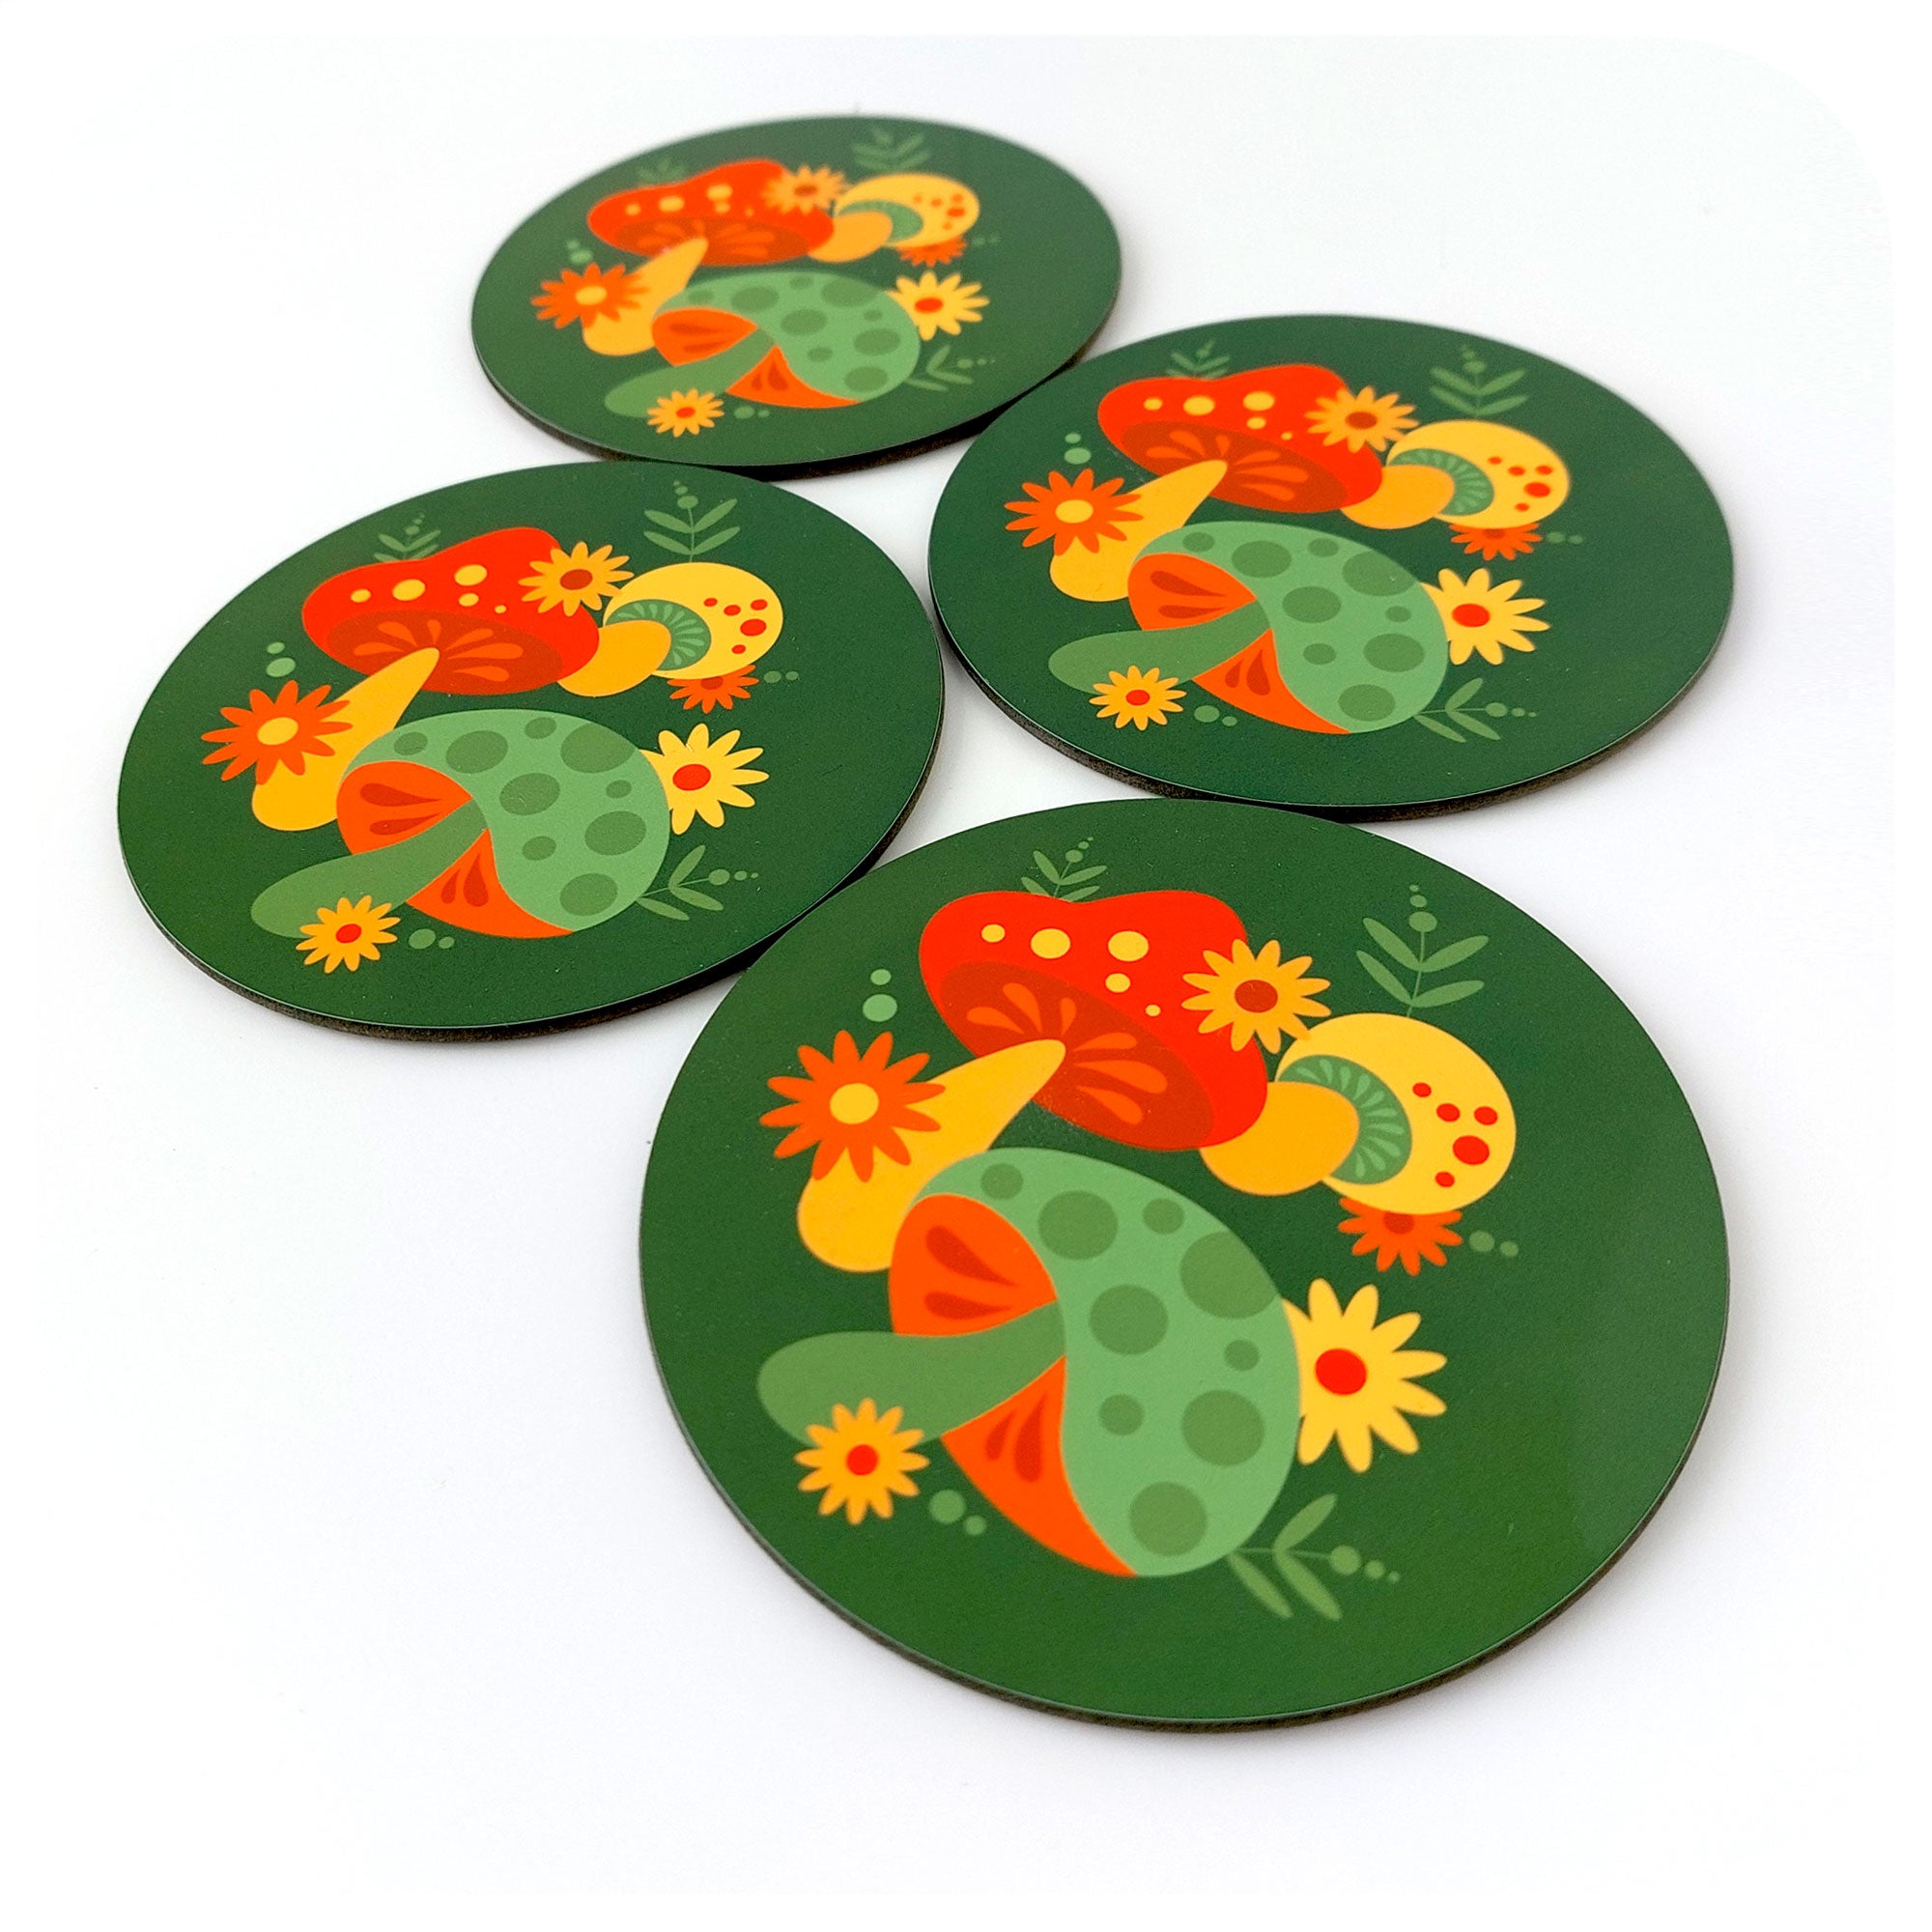 Set of 4 round retro coasters featuring 70s style mushrooms, on a white background | The Inkabilly Emporium